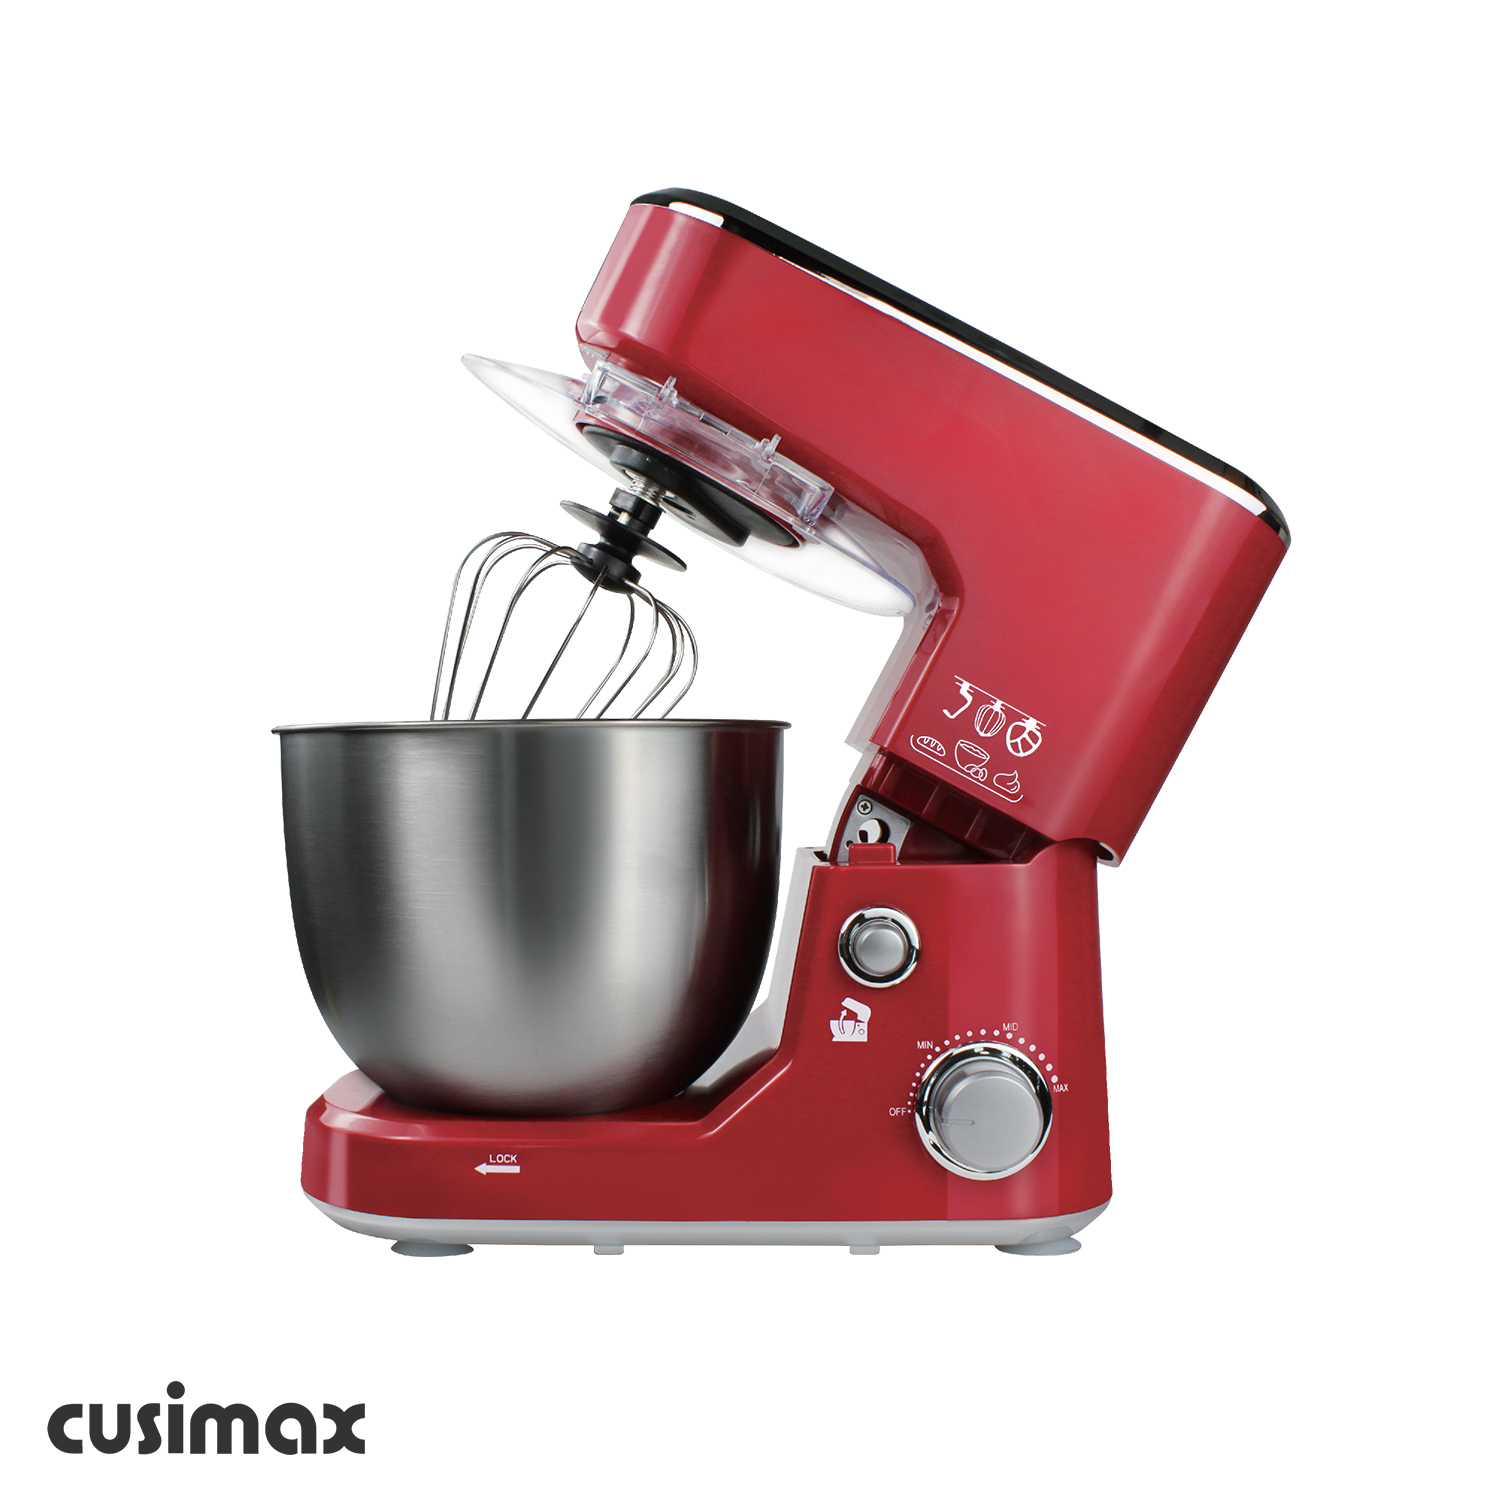 Cusimax Red Stand Mixer With 5-Quart Stainless Steel Bowl-Cusimax